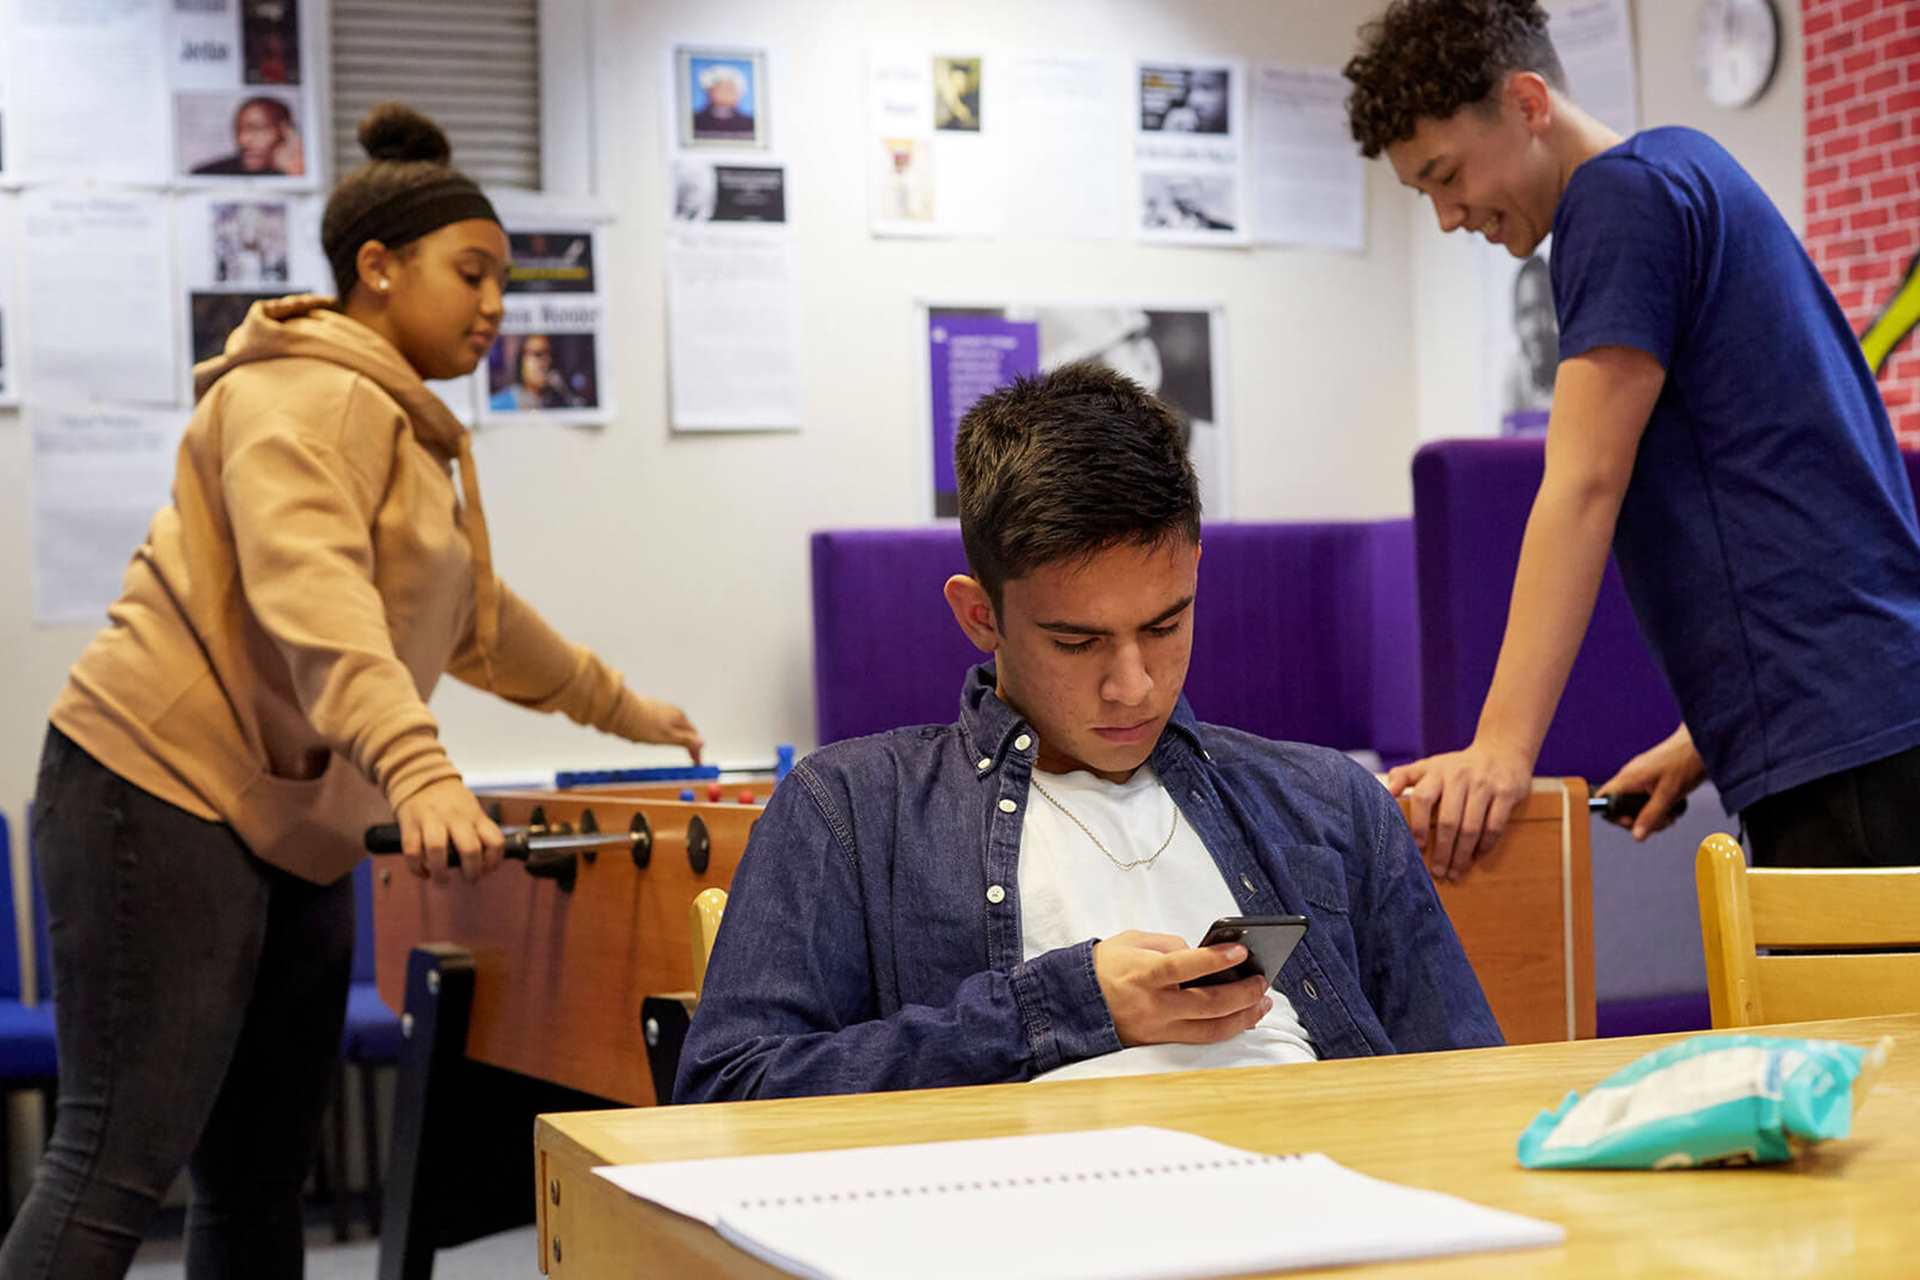 A young person is looking seriously down at his phone at a table in a common room. There are two young people behind him playing table top football, one of them is laughing.